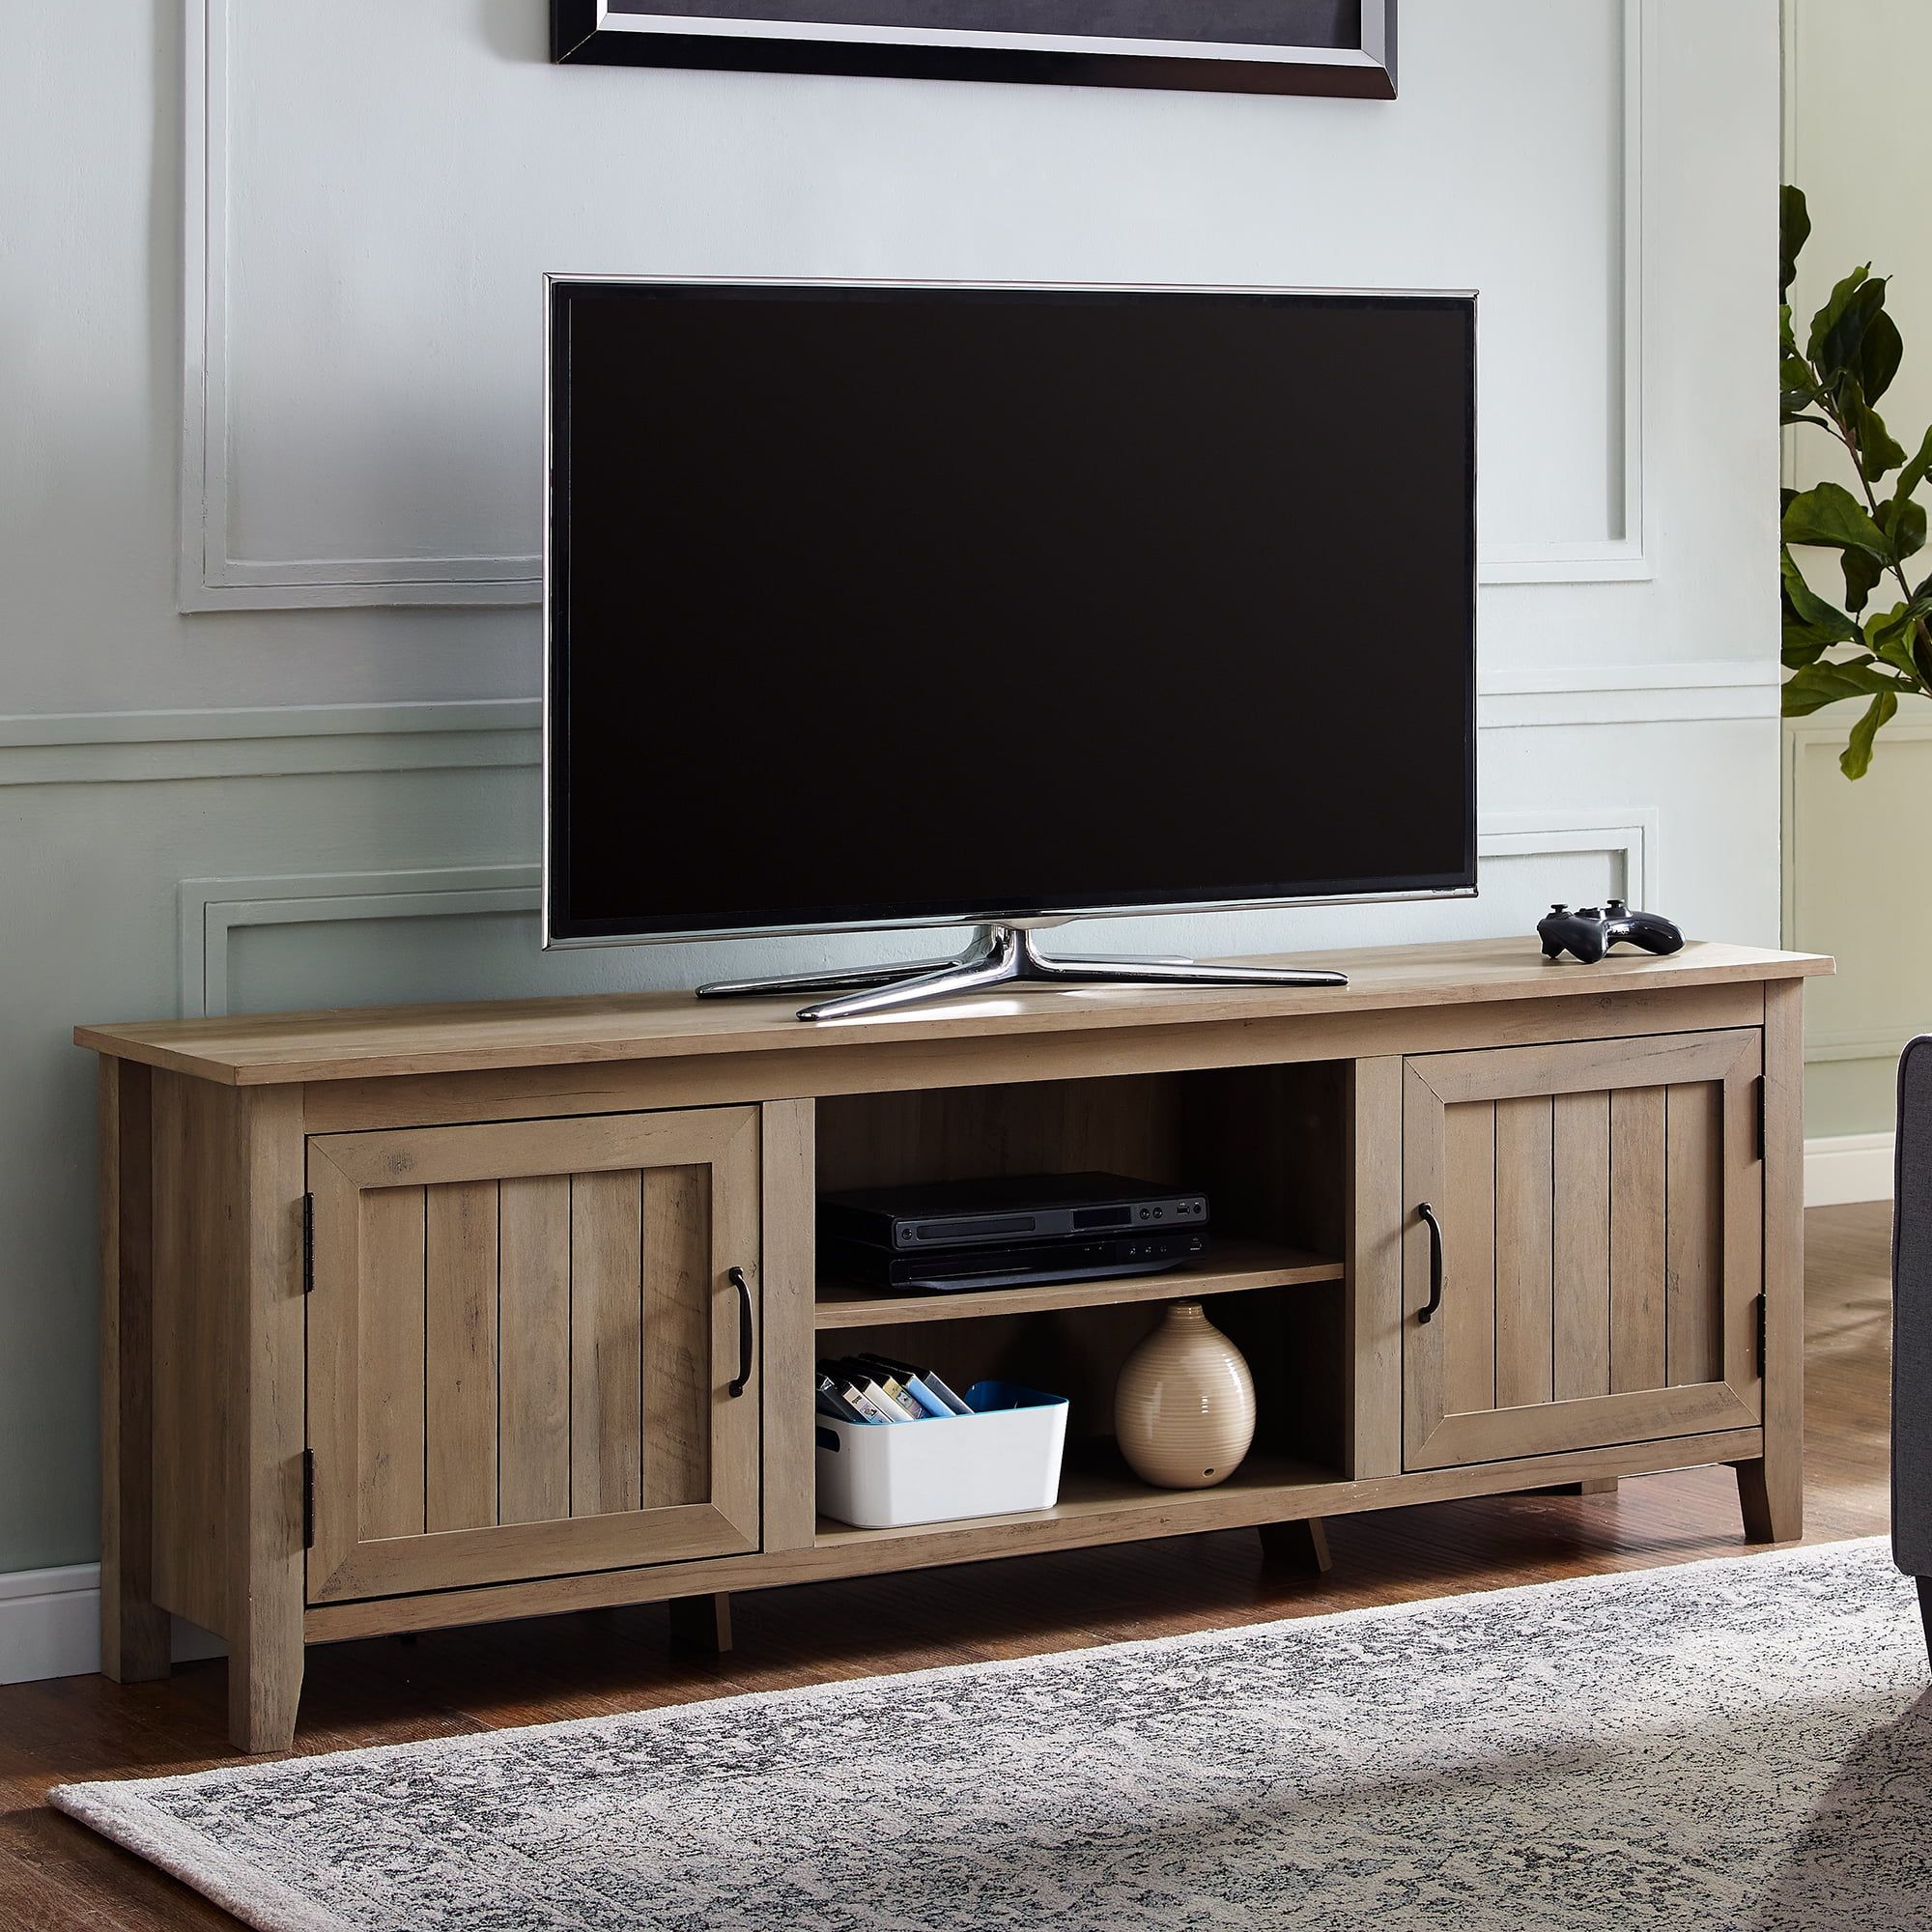 Manor Park Farmhouse Tv Stand For Tvs Up To 80", Reclaimed Barnwood Regarding Farmhouse Tv Stands (View 6 of 20)